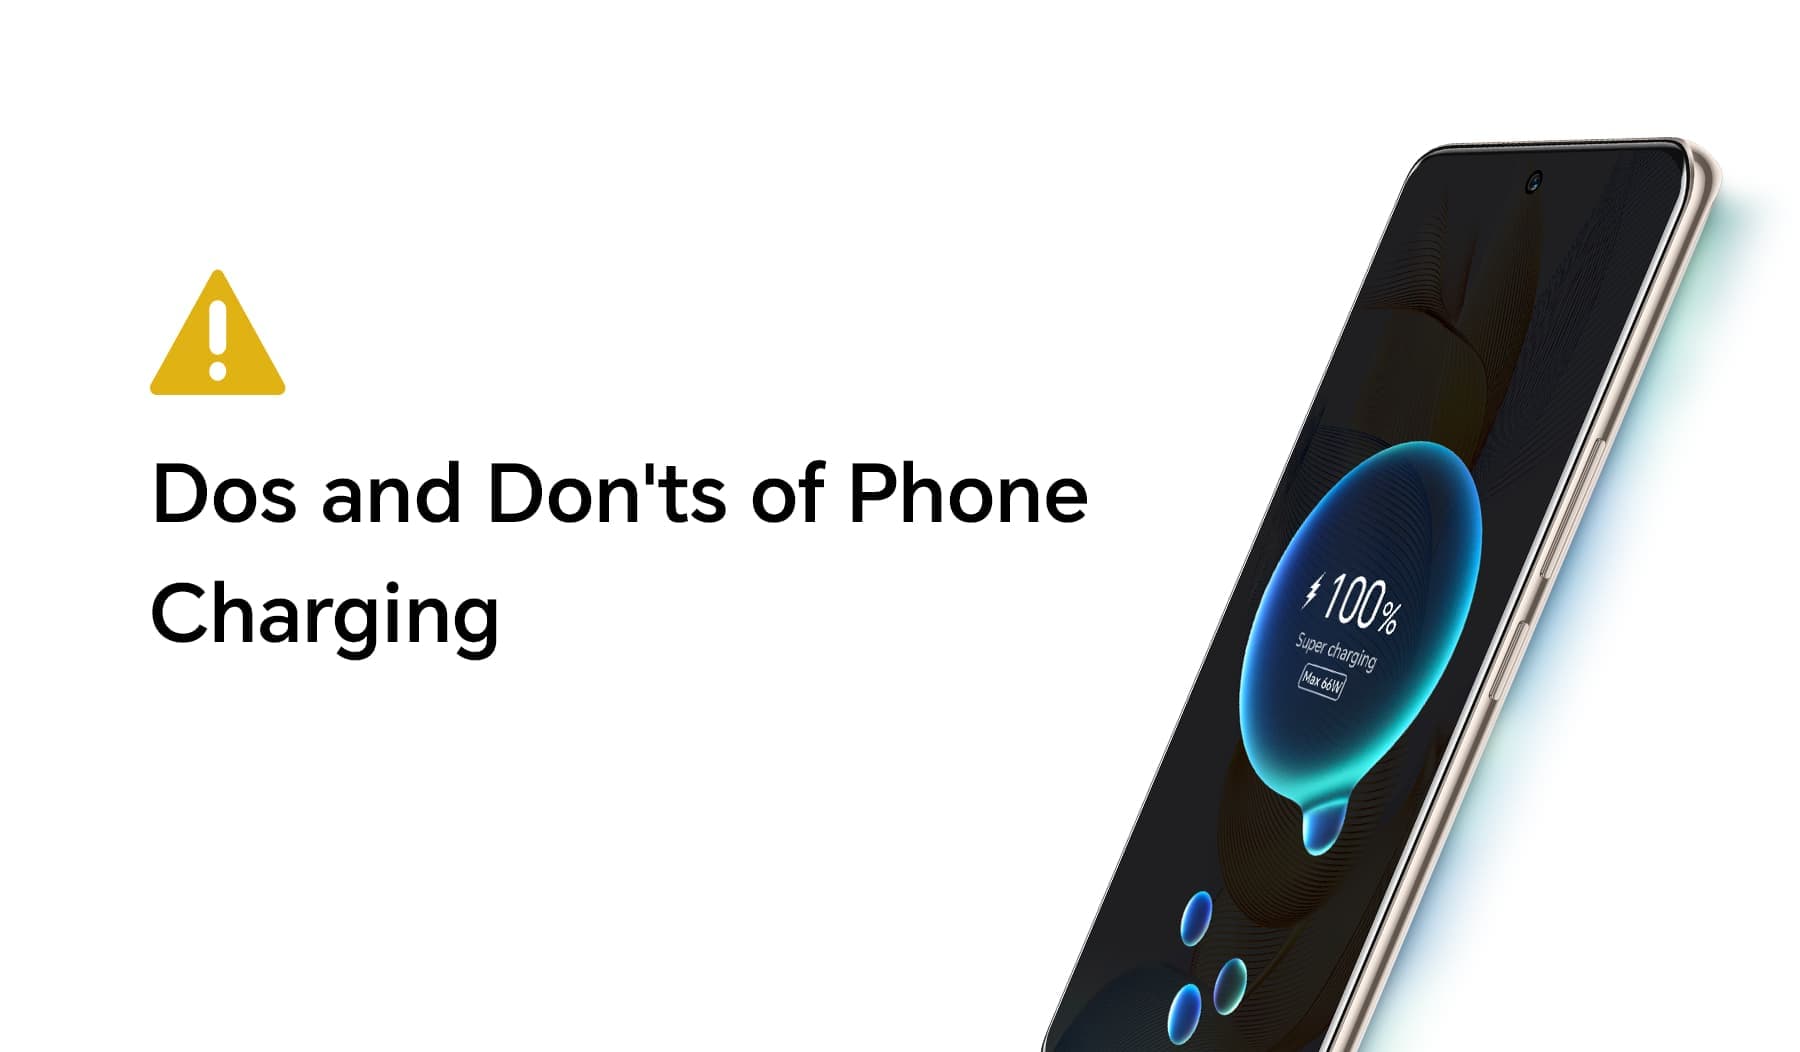 Dos and Don'ts of Phone Charging